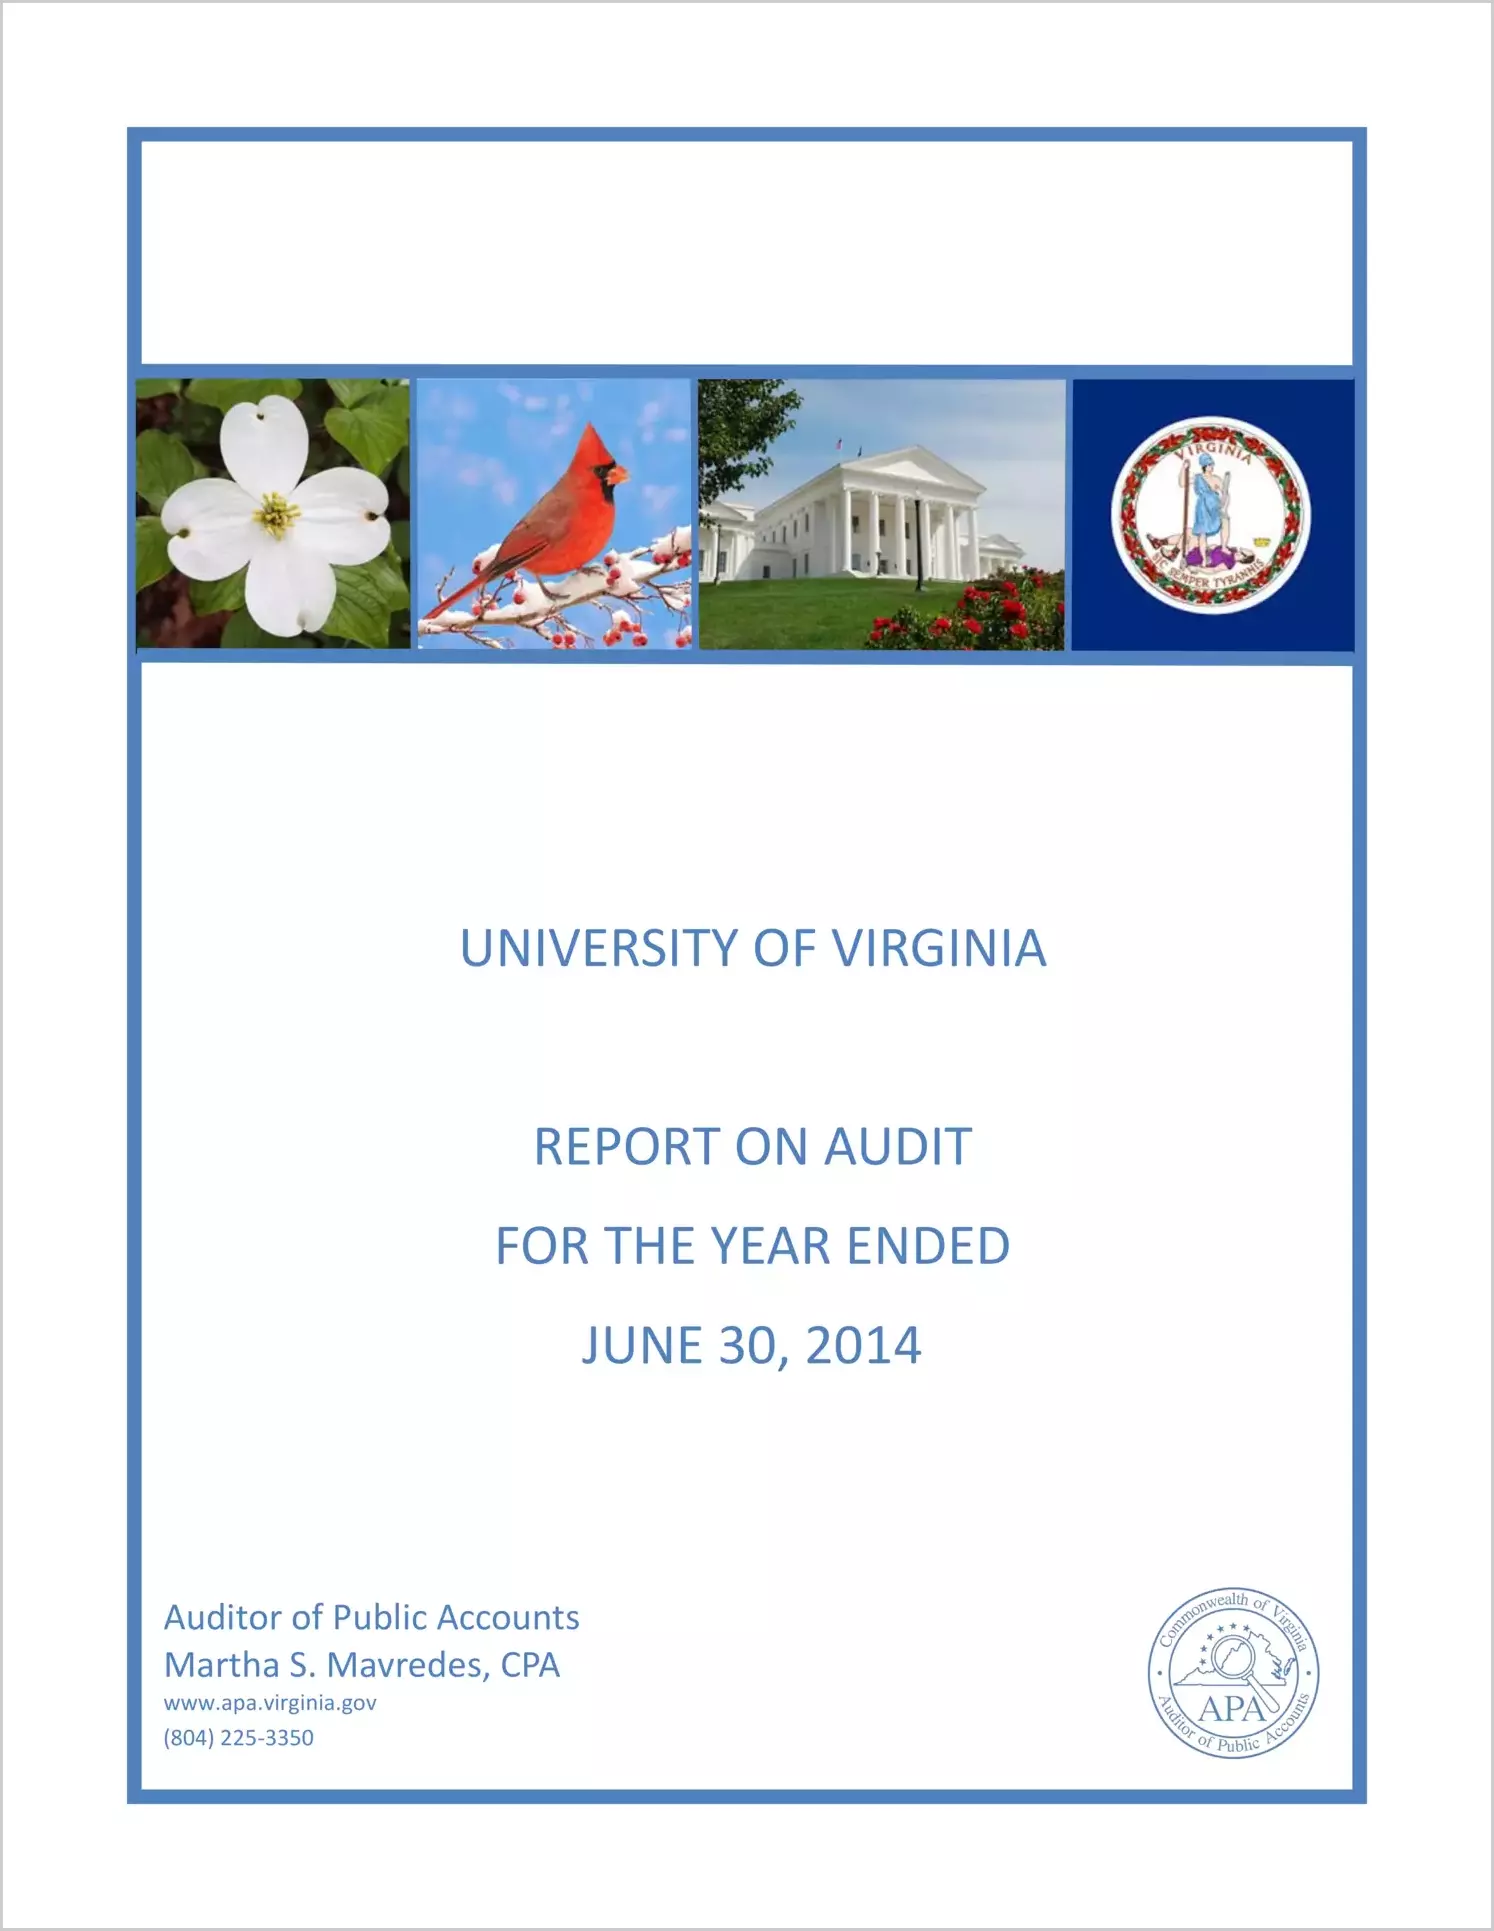 University of Virginia for the year ended June 30, 2014